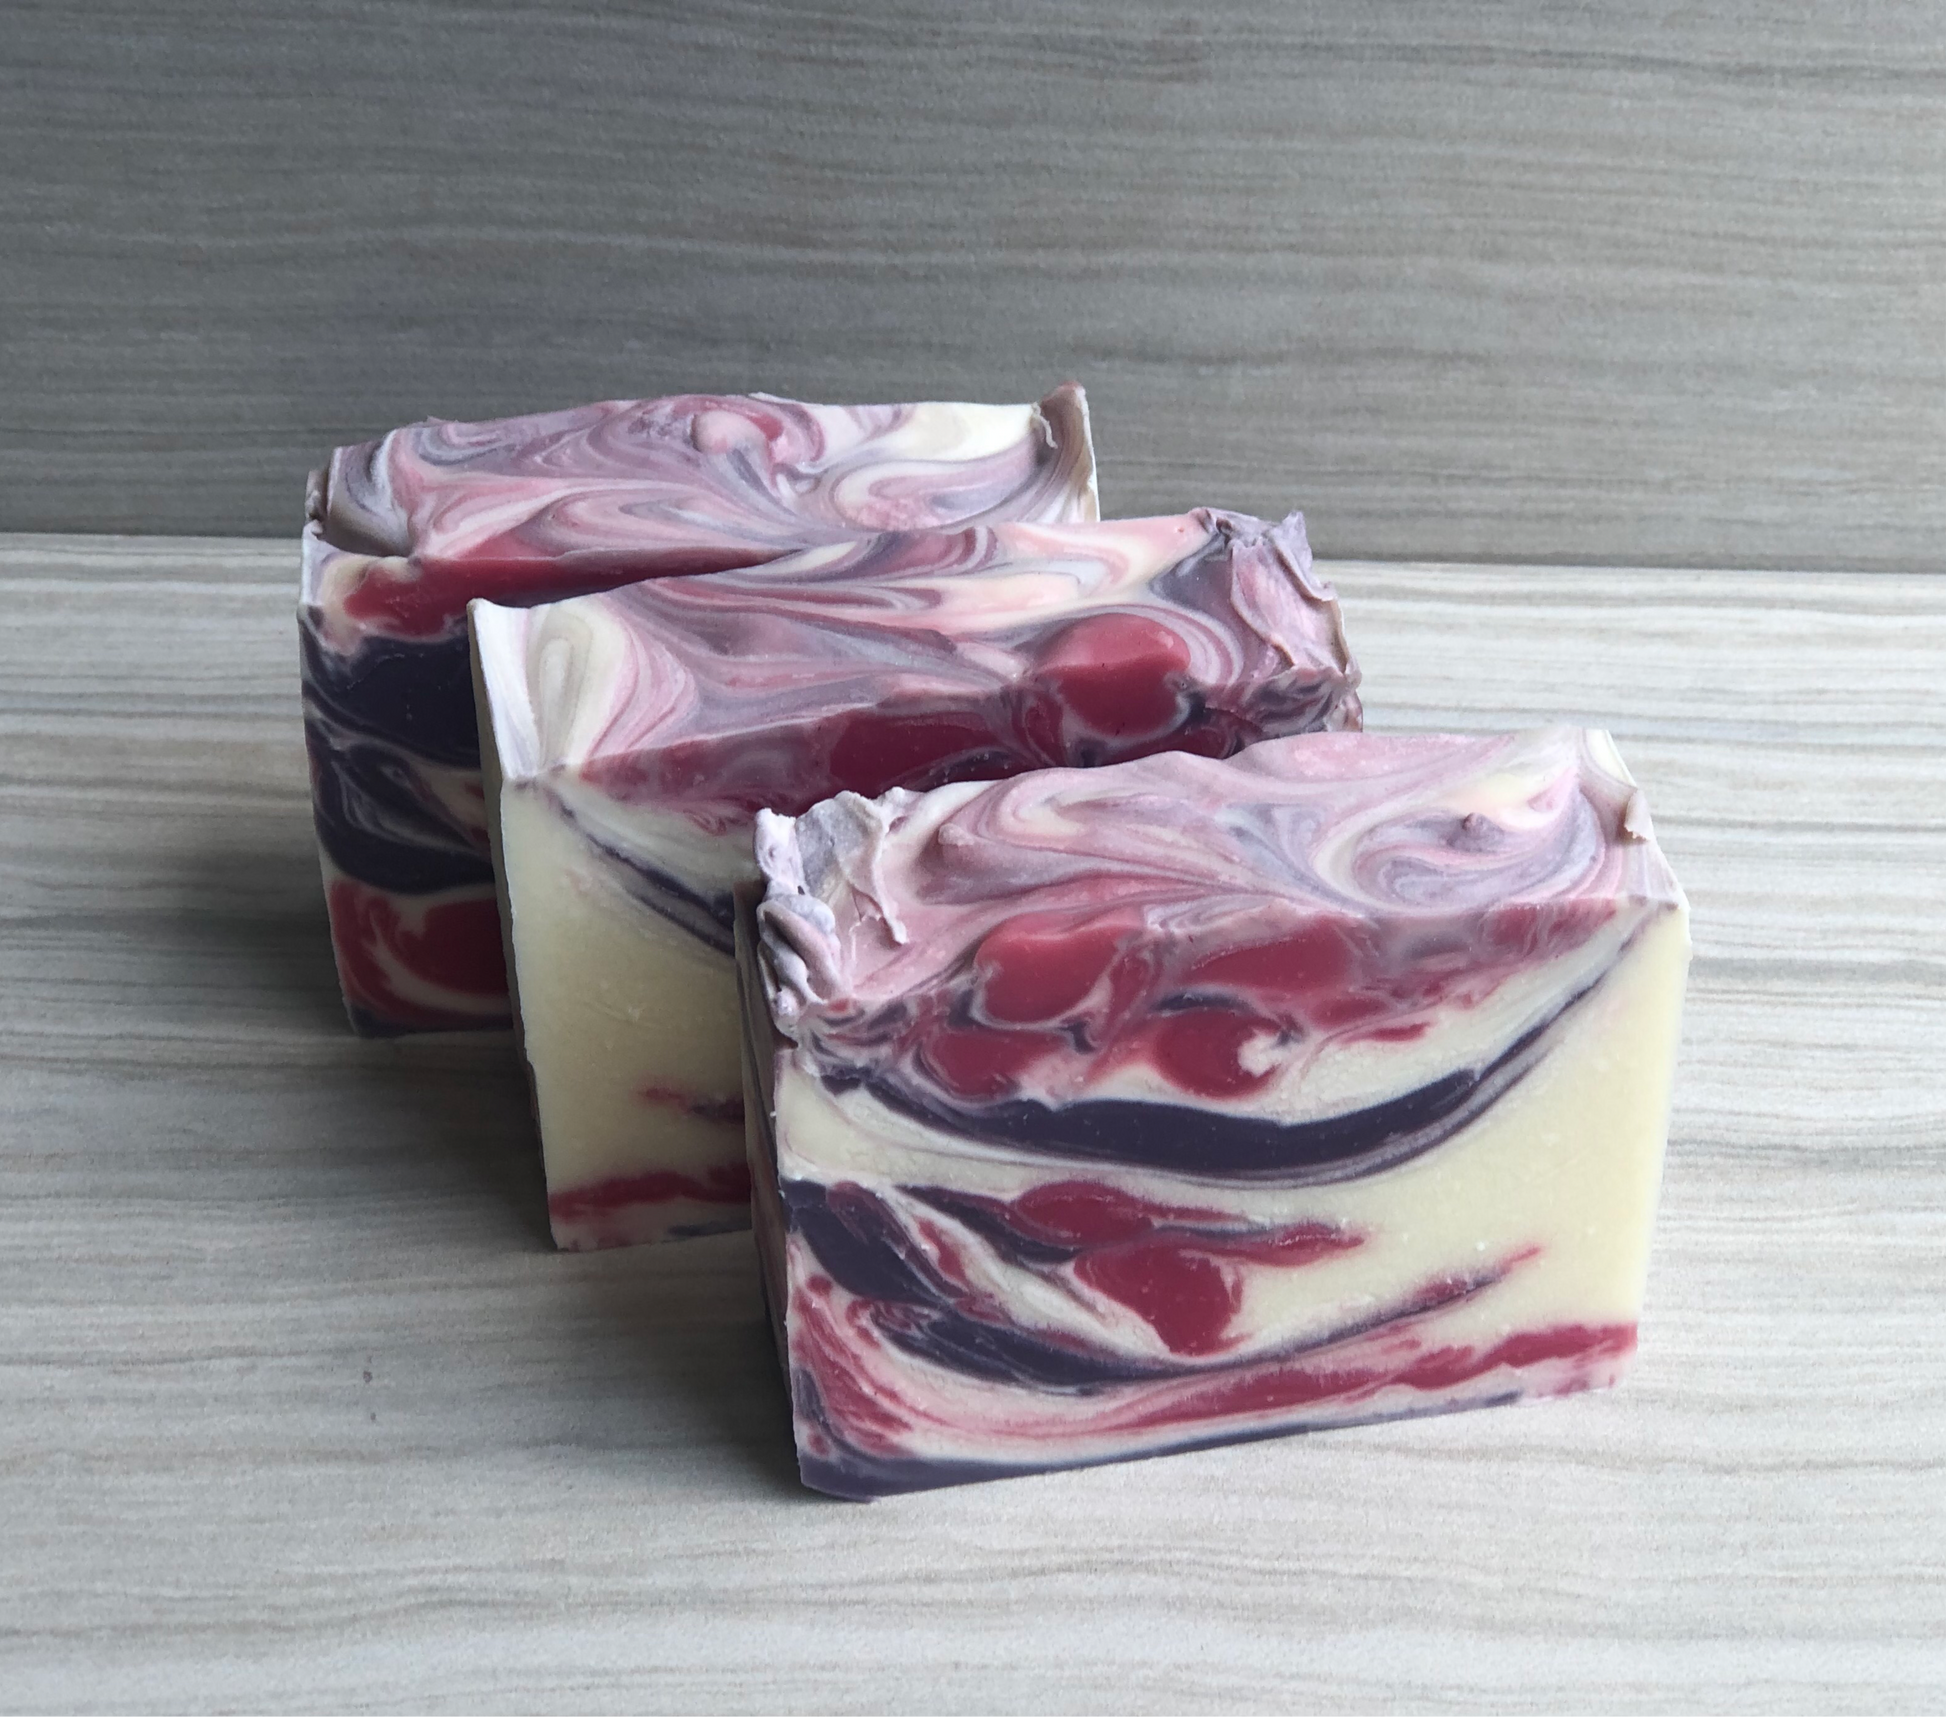 Soap bar with Notes: bergamot, pear, plum wine, vanilla, orchid, cashmere, and musk